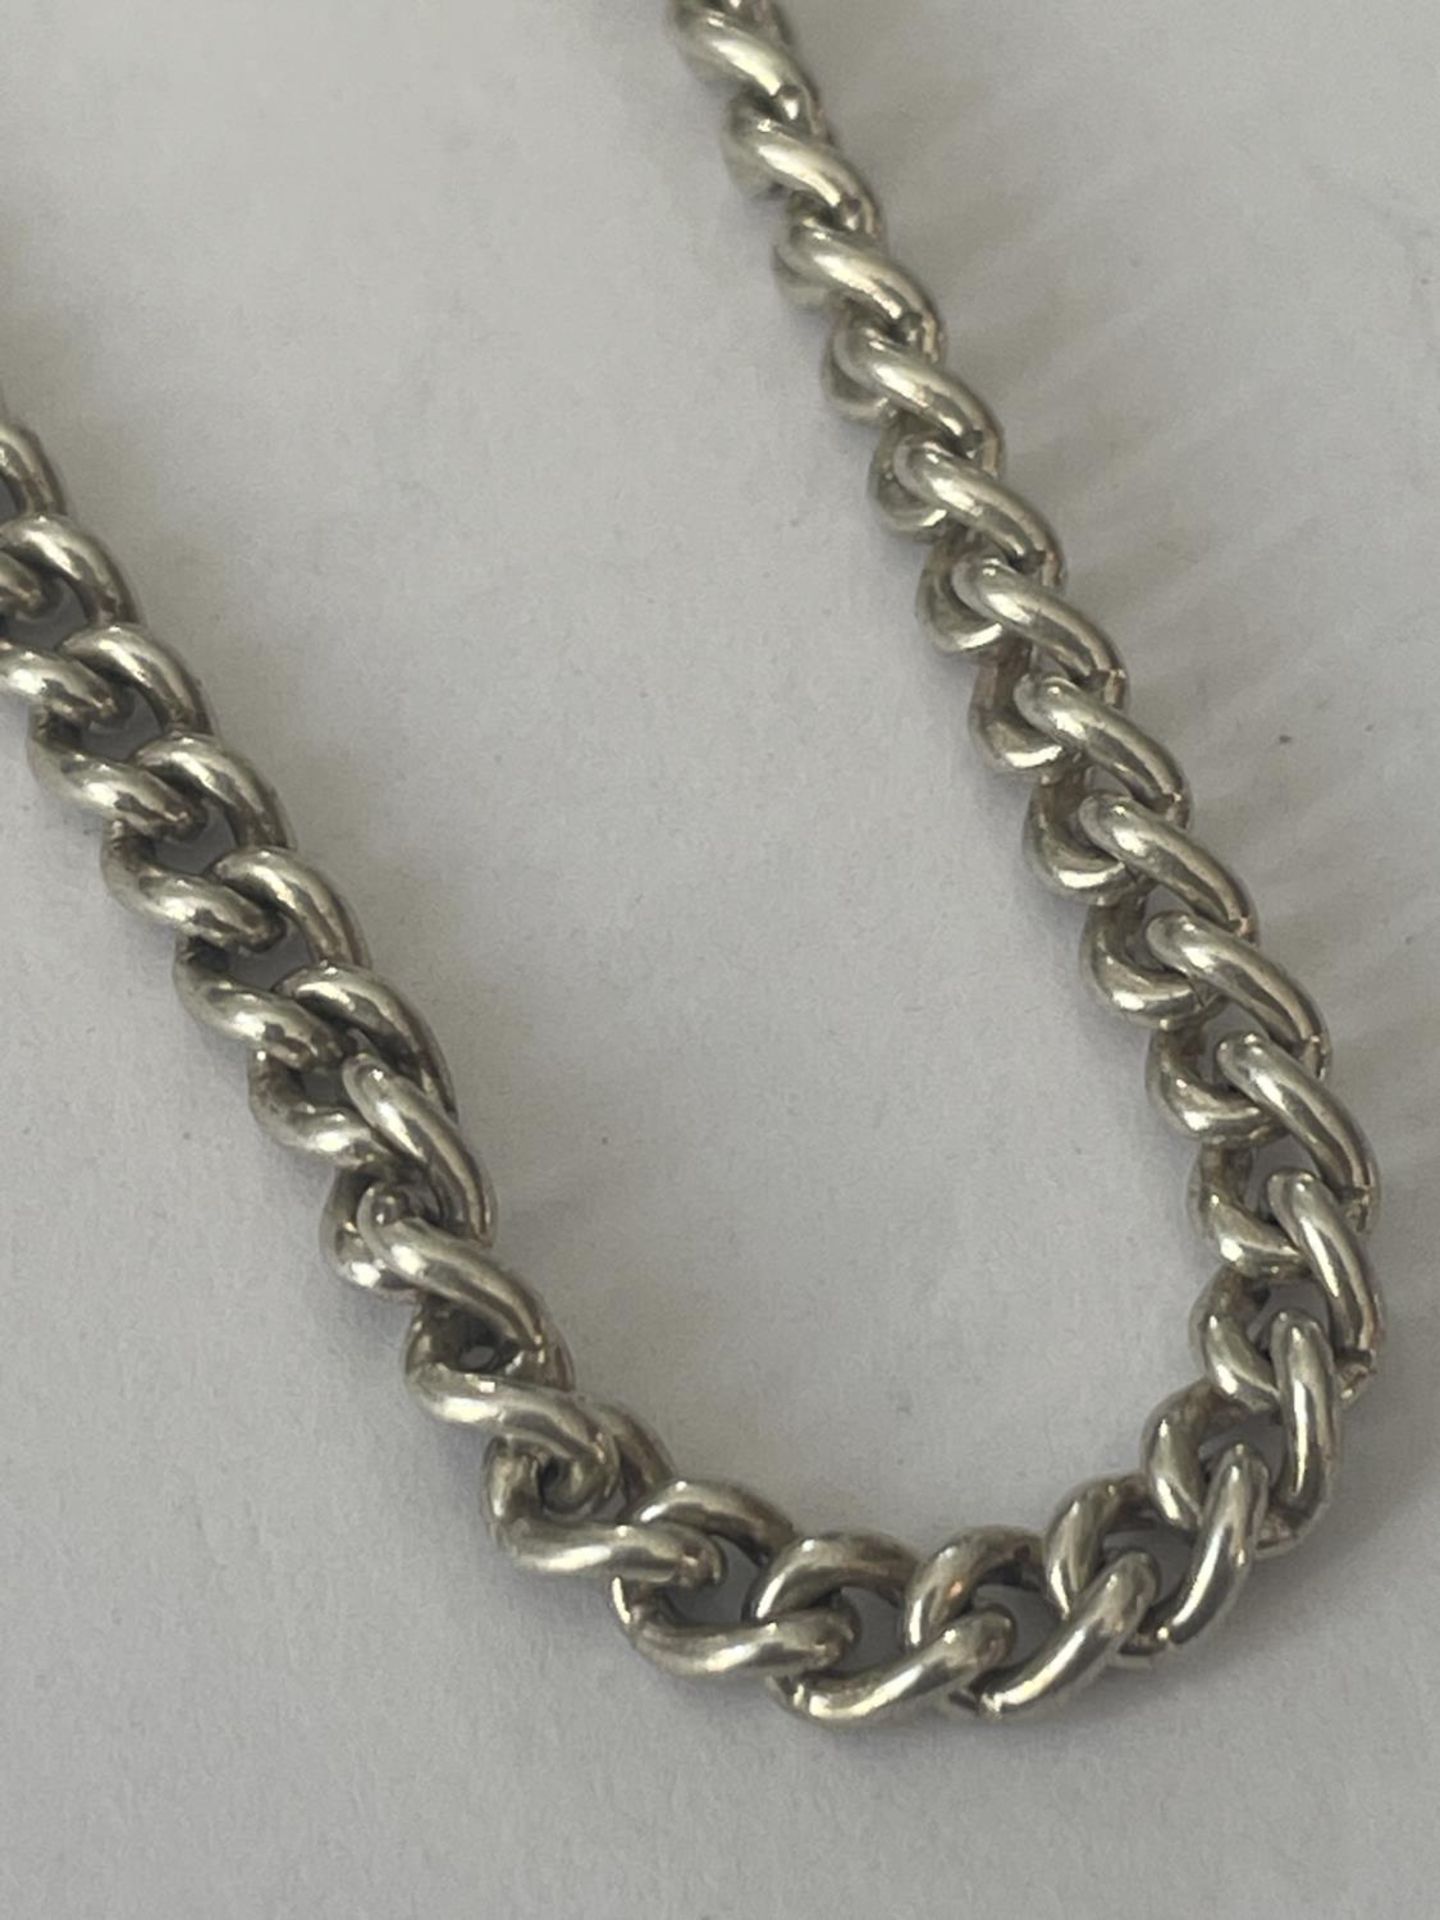 A 20" SILVER NECK CHAIN - Image 2 of 3